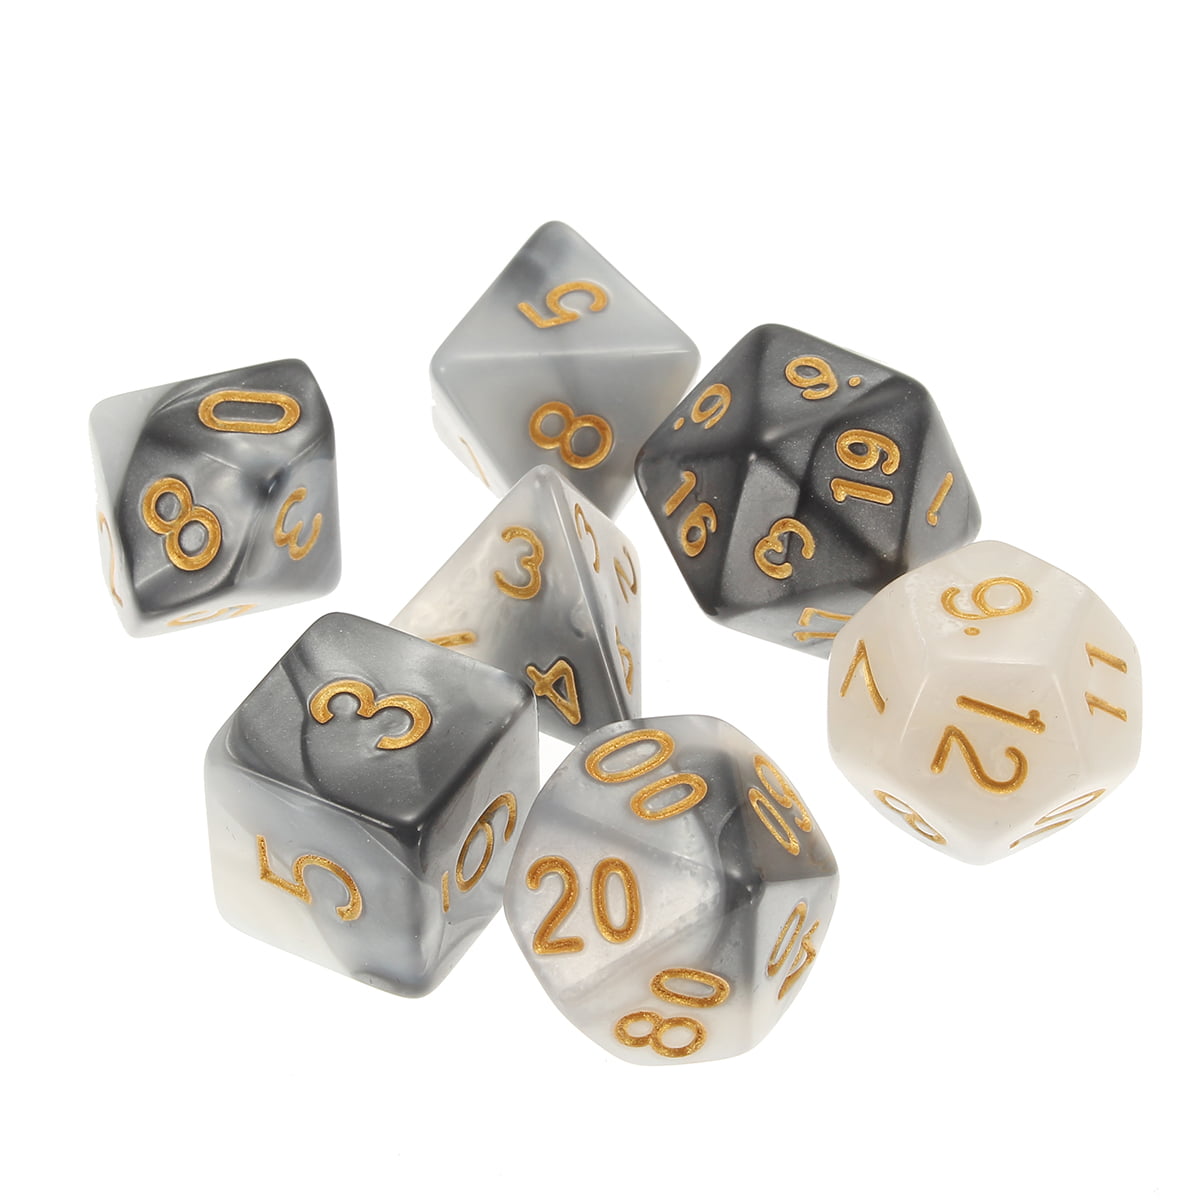 42 PcsAcrylic Polyhedral Dice w/ 6 Bags for DND RPG MTG Role Playing Board Game 